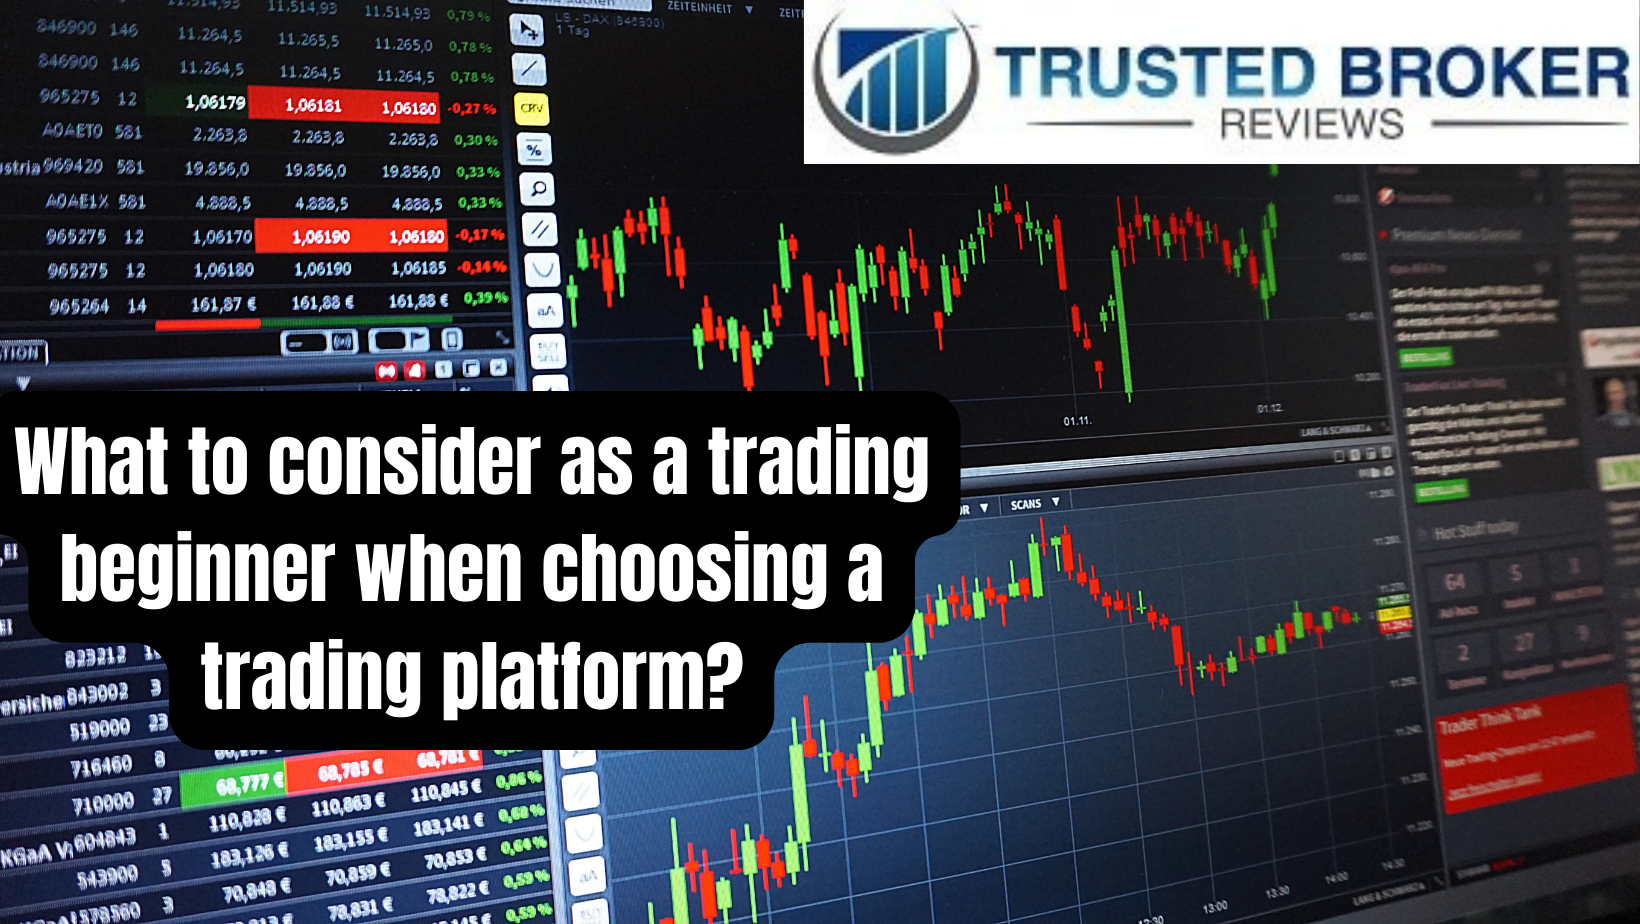 What to consider as a trading beginner when choosing a trading platform?